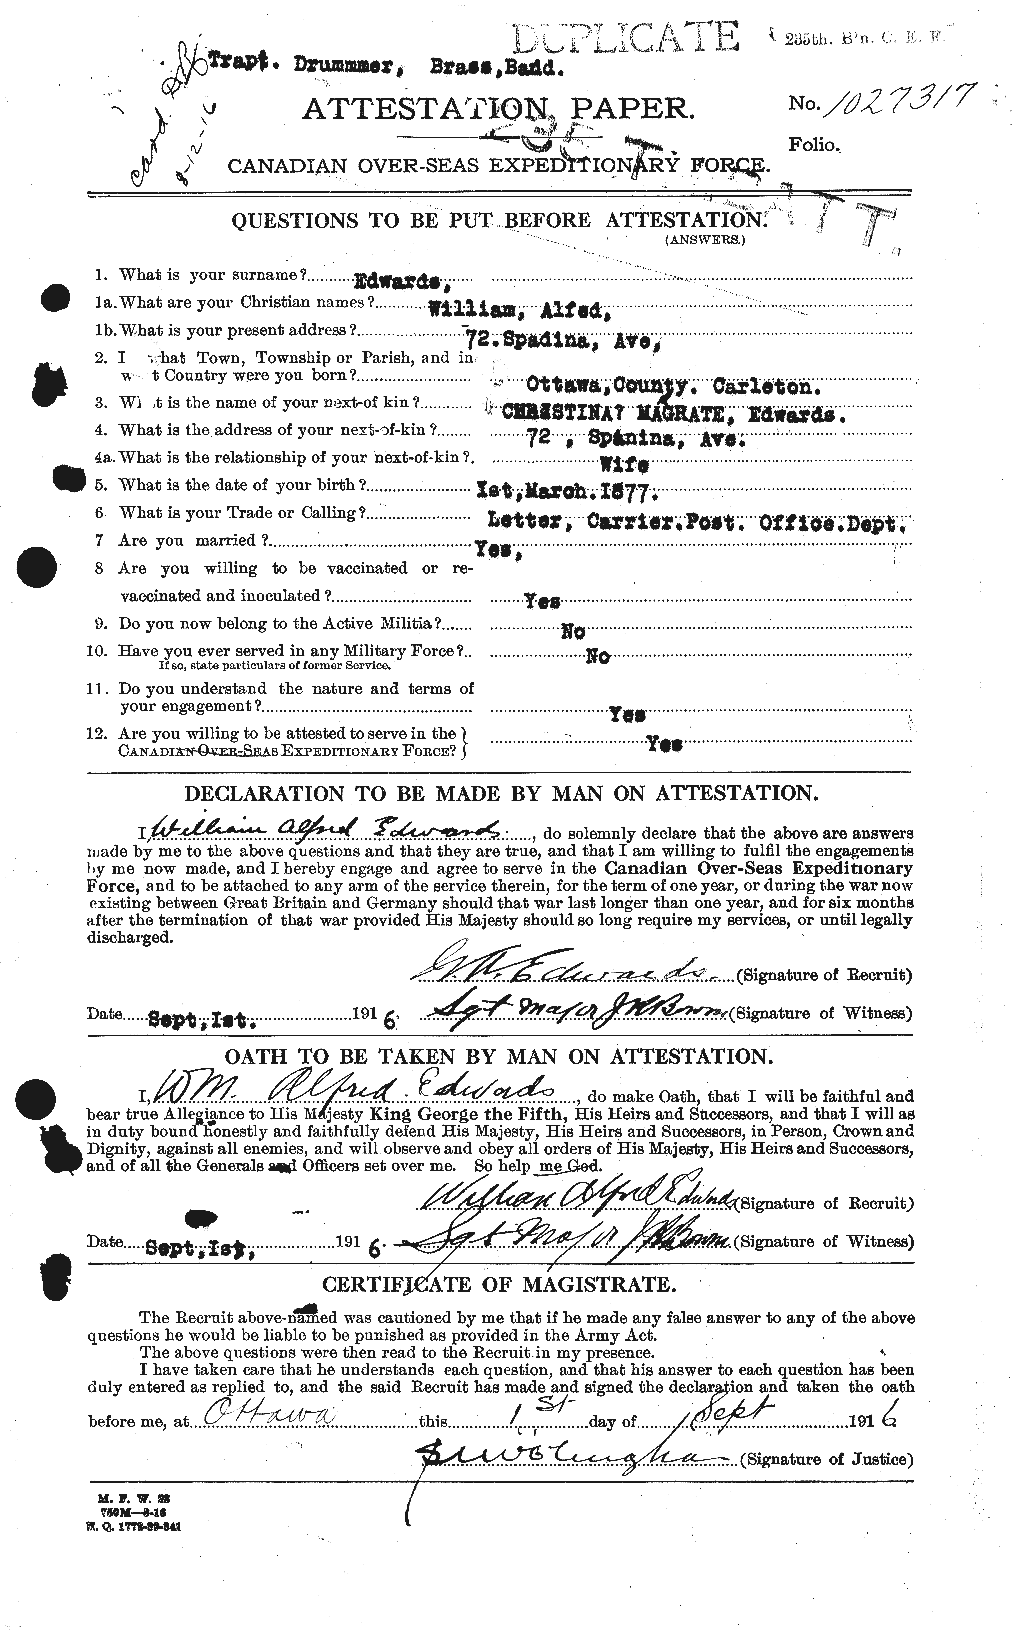 Personnel Records of the First World War - CEF 310409a